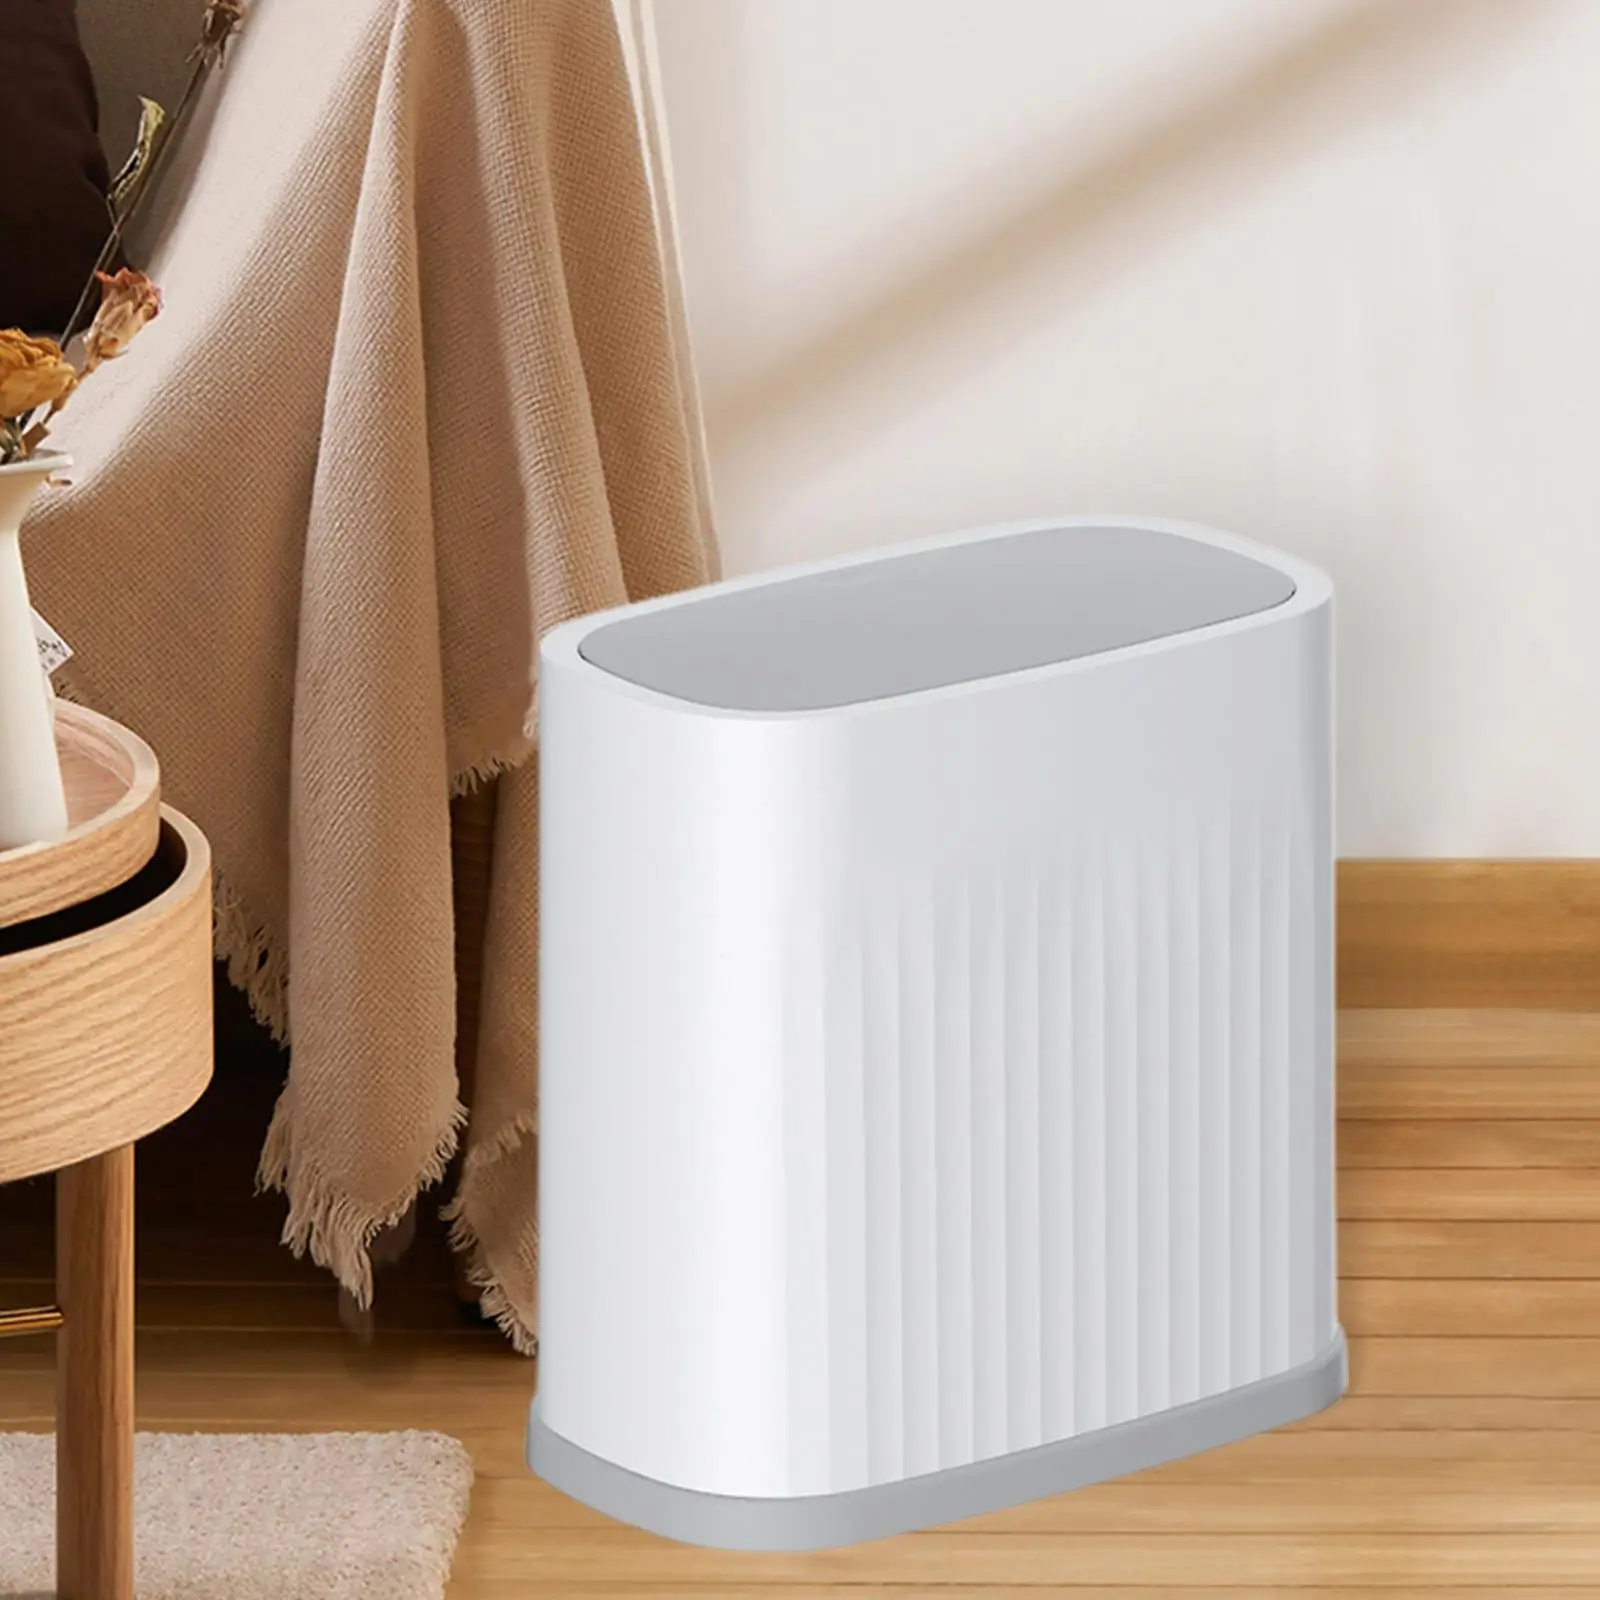 Rectangular Trash Can Wastebasket with Lid Small Garbage Can Narrow Little Waste Bin for Kitchen Laundry Bedroom Toilet Bathroom